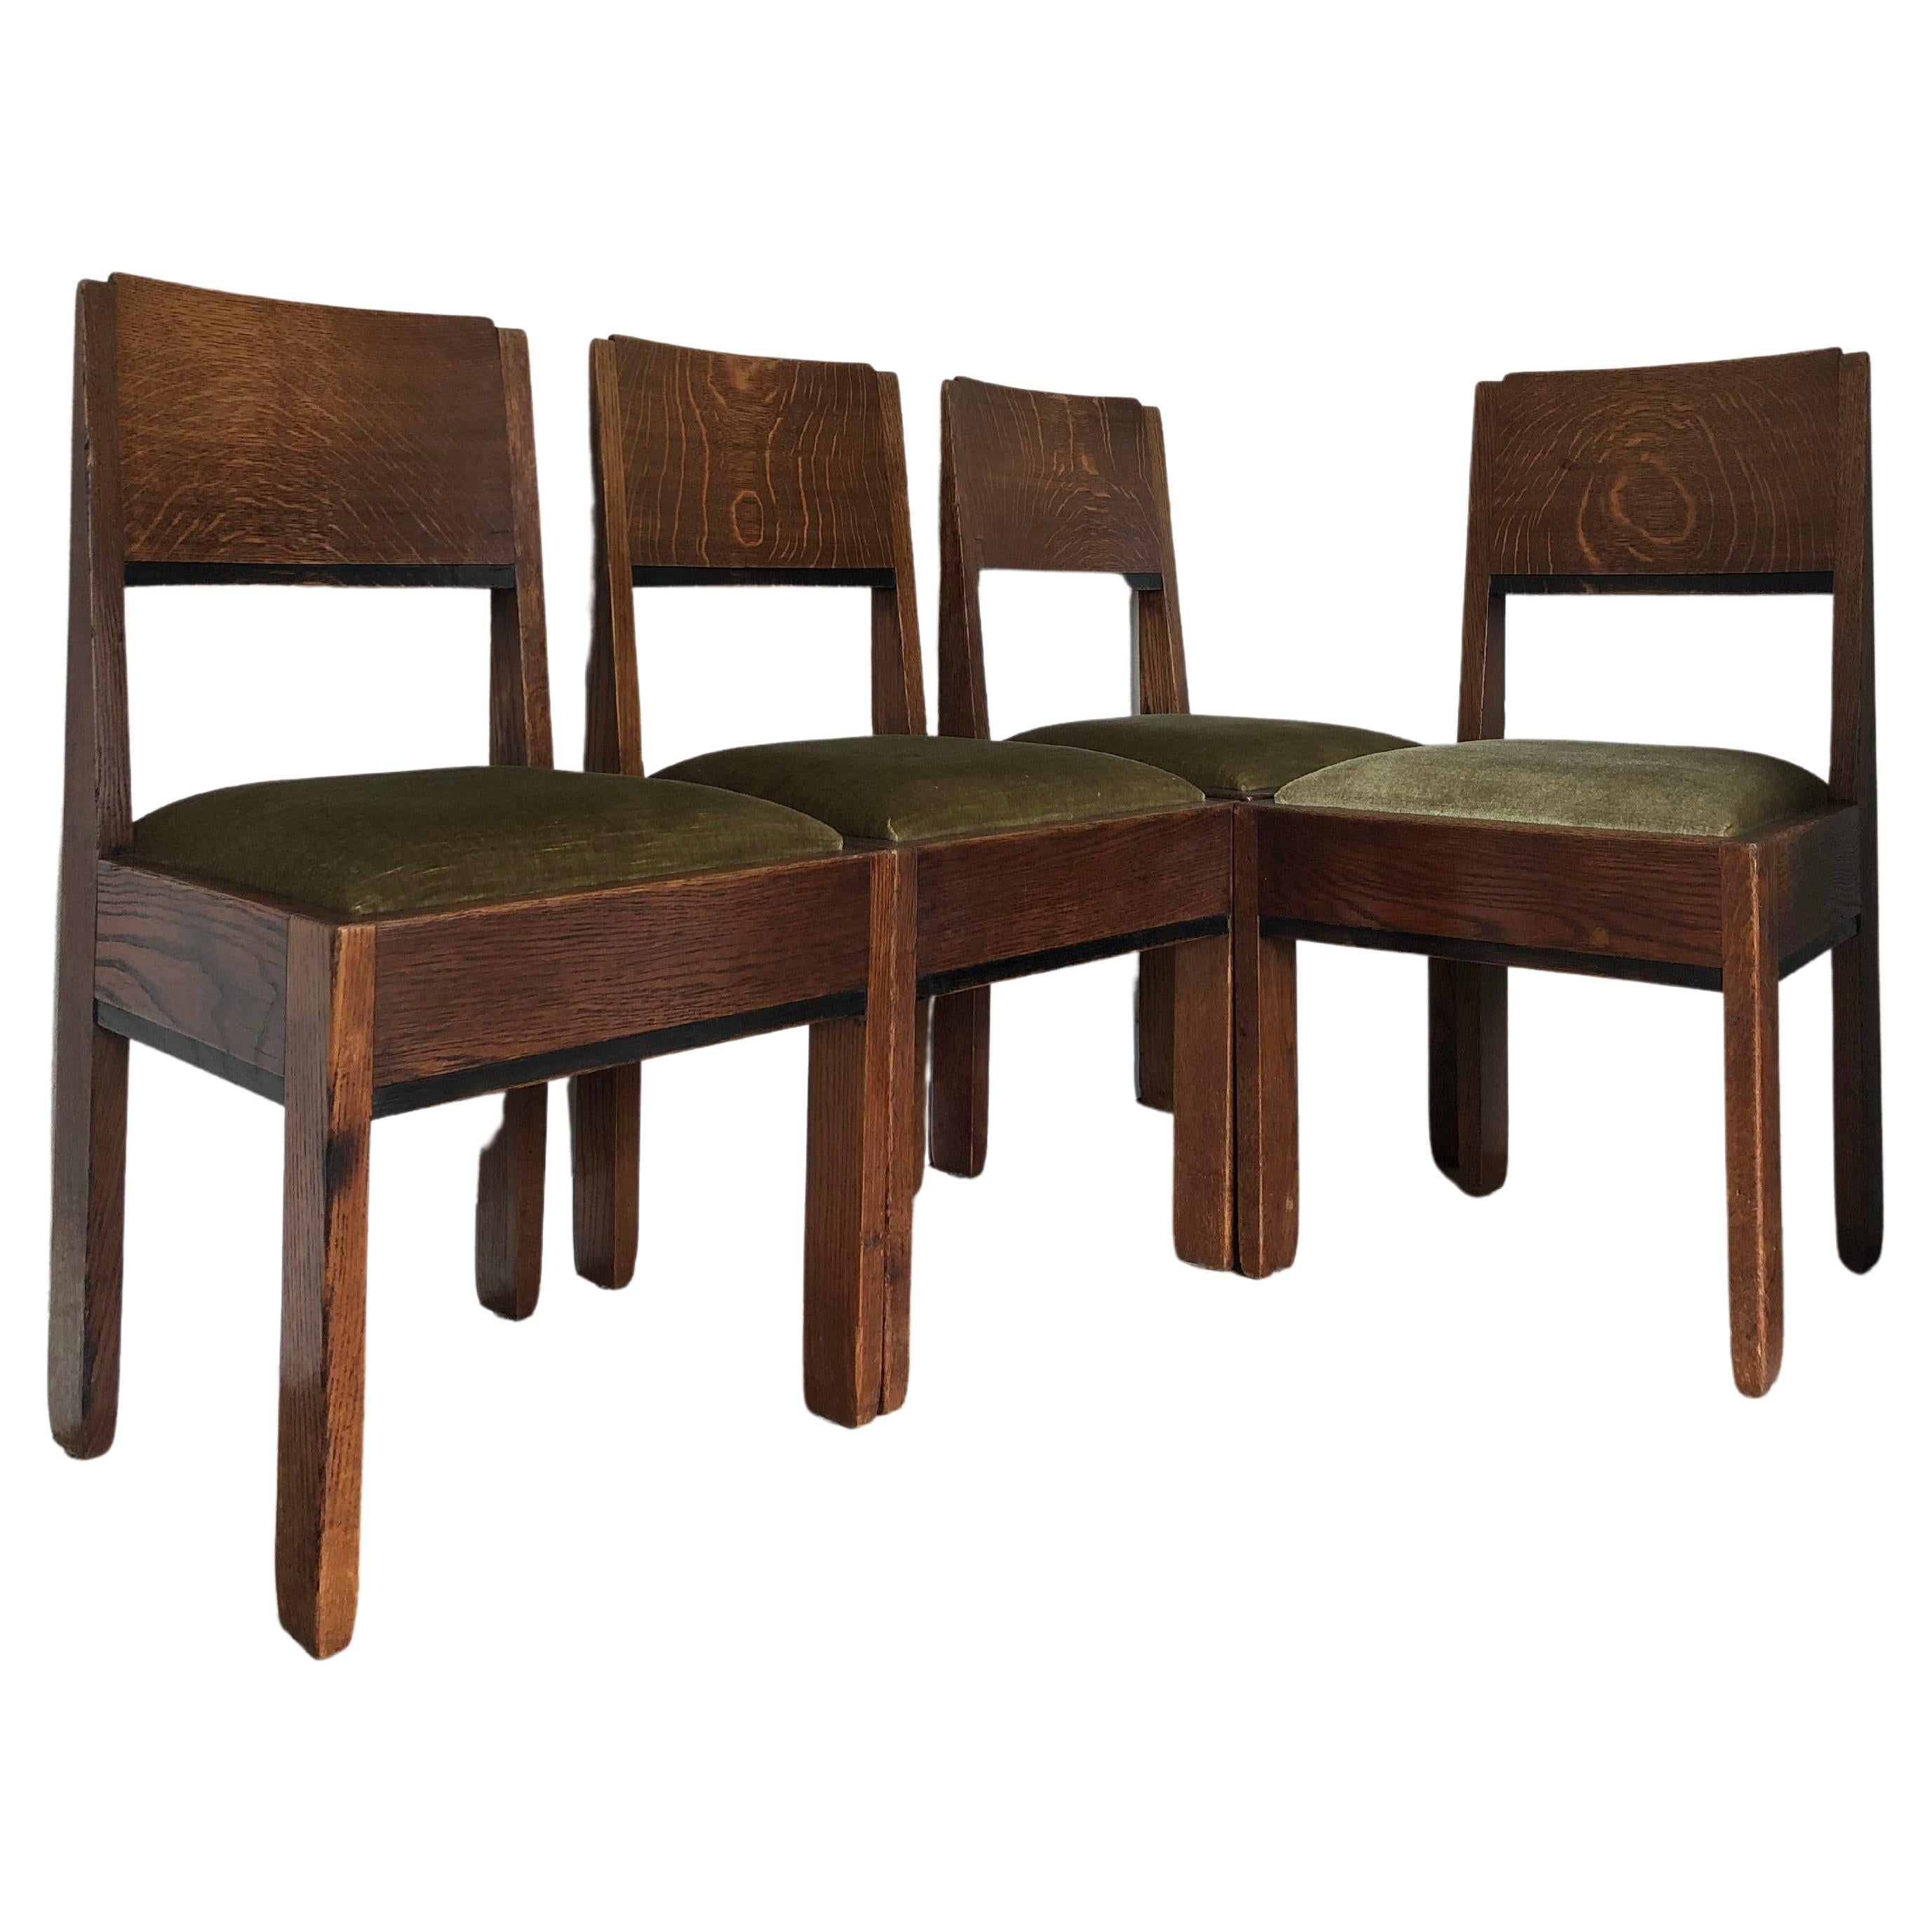 1920s Dining Room Chairs